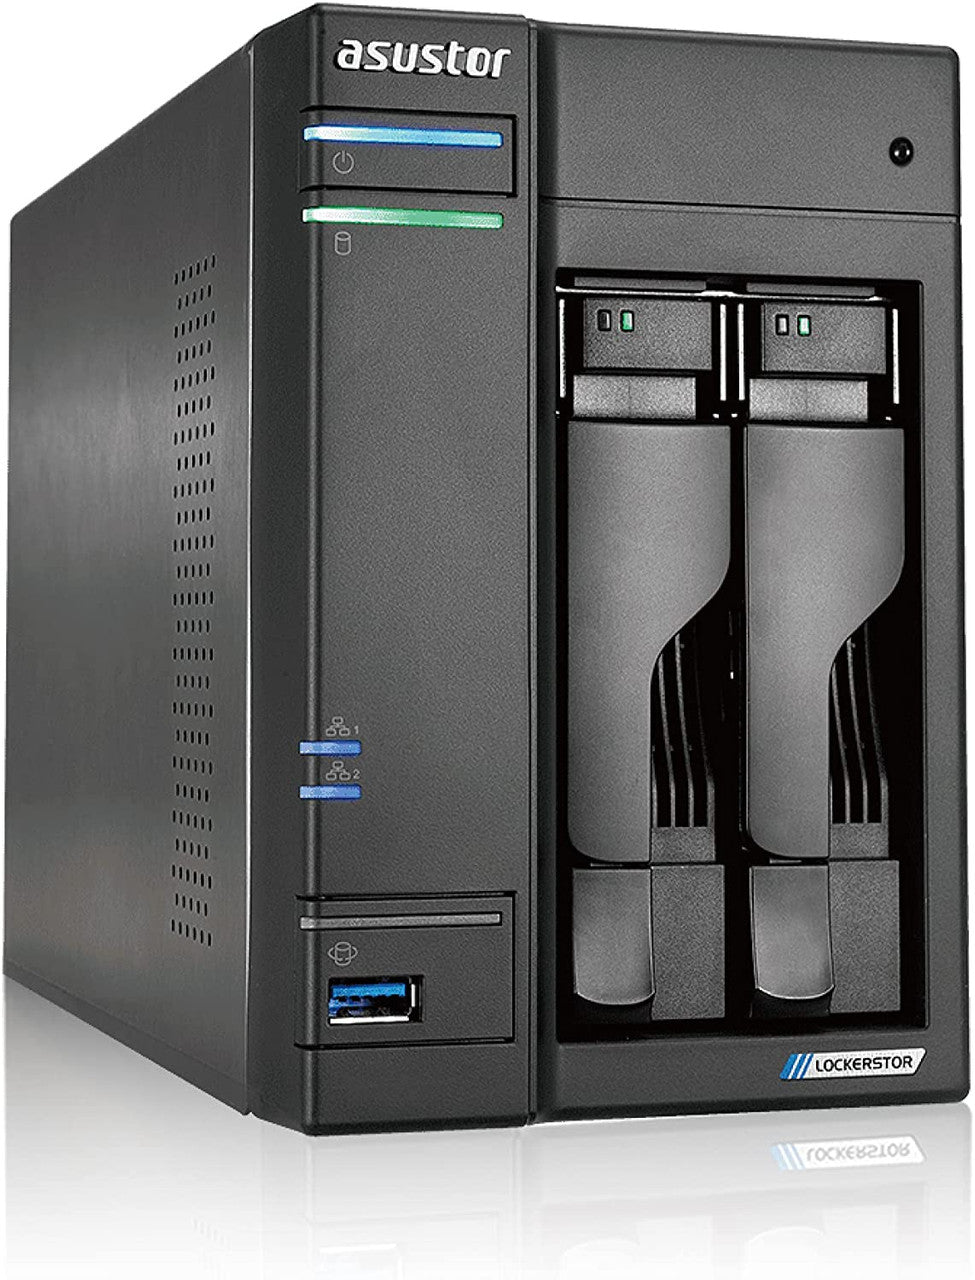 Asustor AS6602T 2-Bay Lockerstor 2 NAS with 4GB RAM and 24TB (2x12TB) Seagate Ironwolf NAS Drives